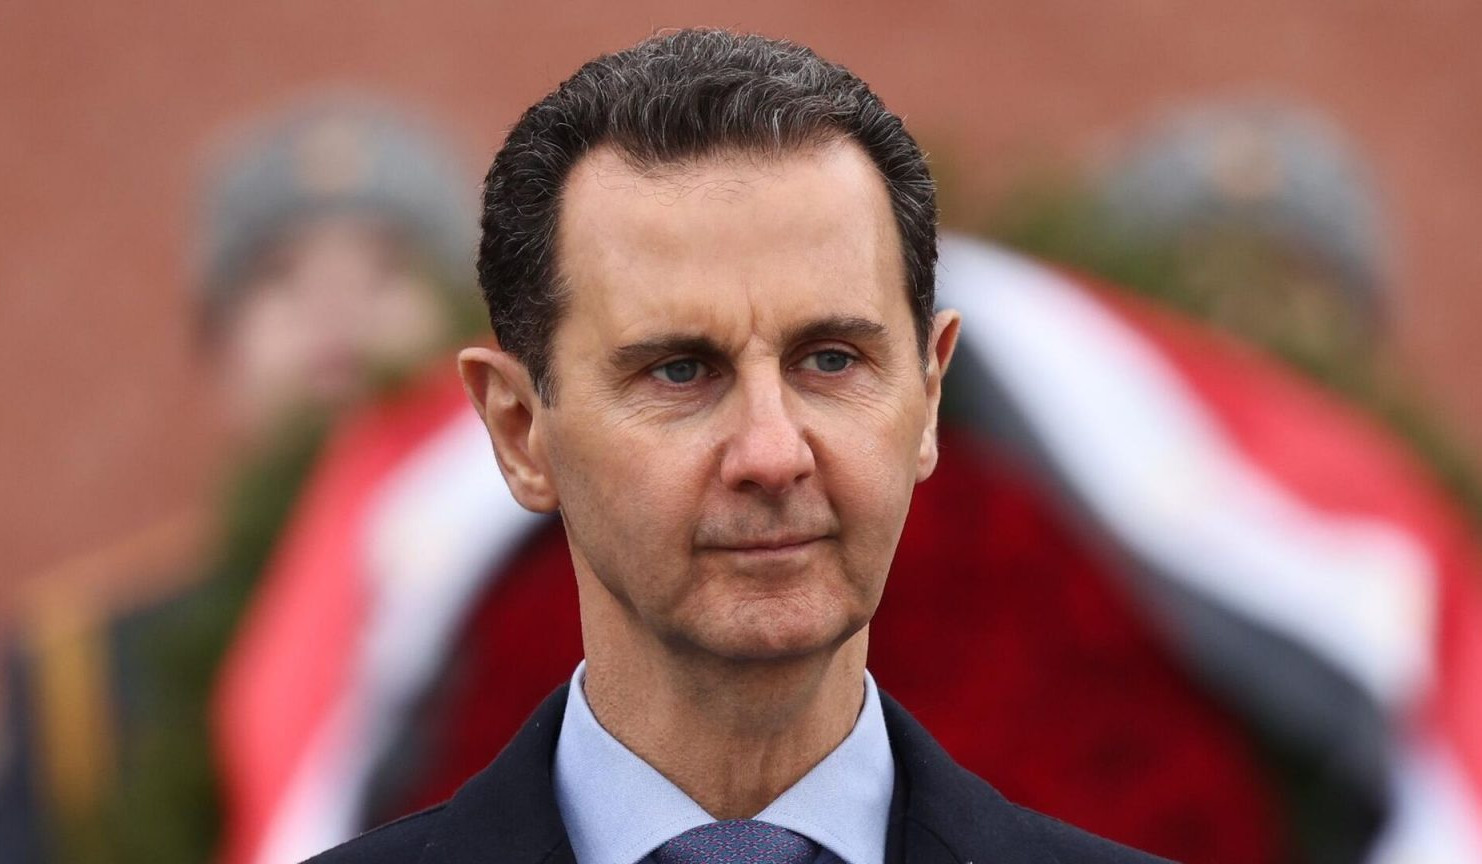 Syria supports Palestinian struggle to create independent state: Bashar al-Assad